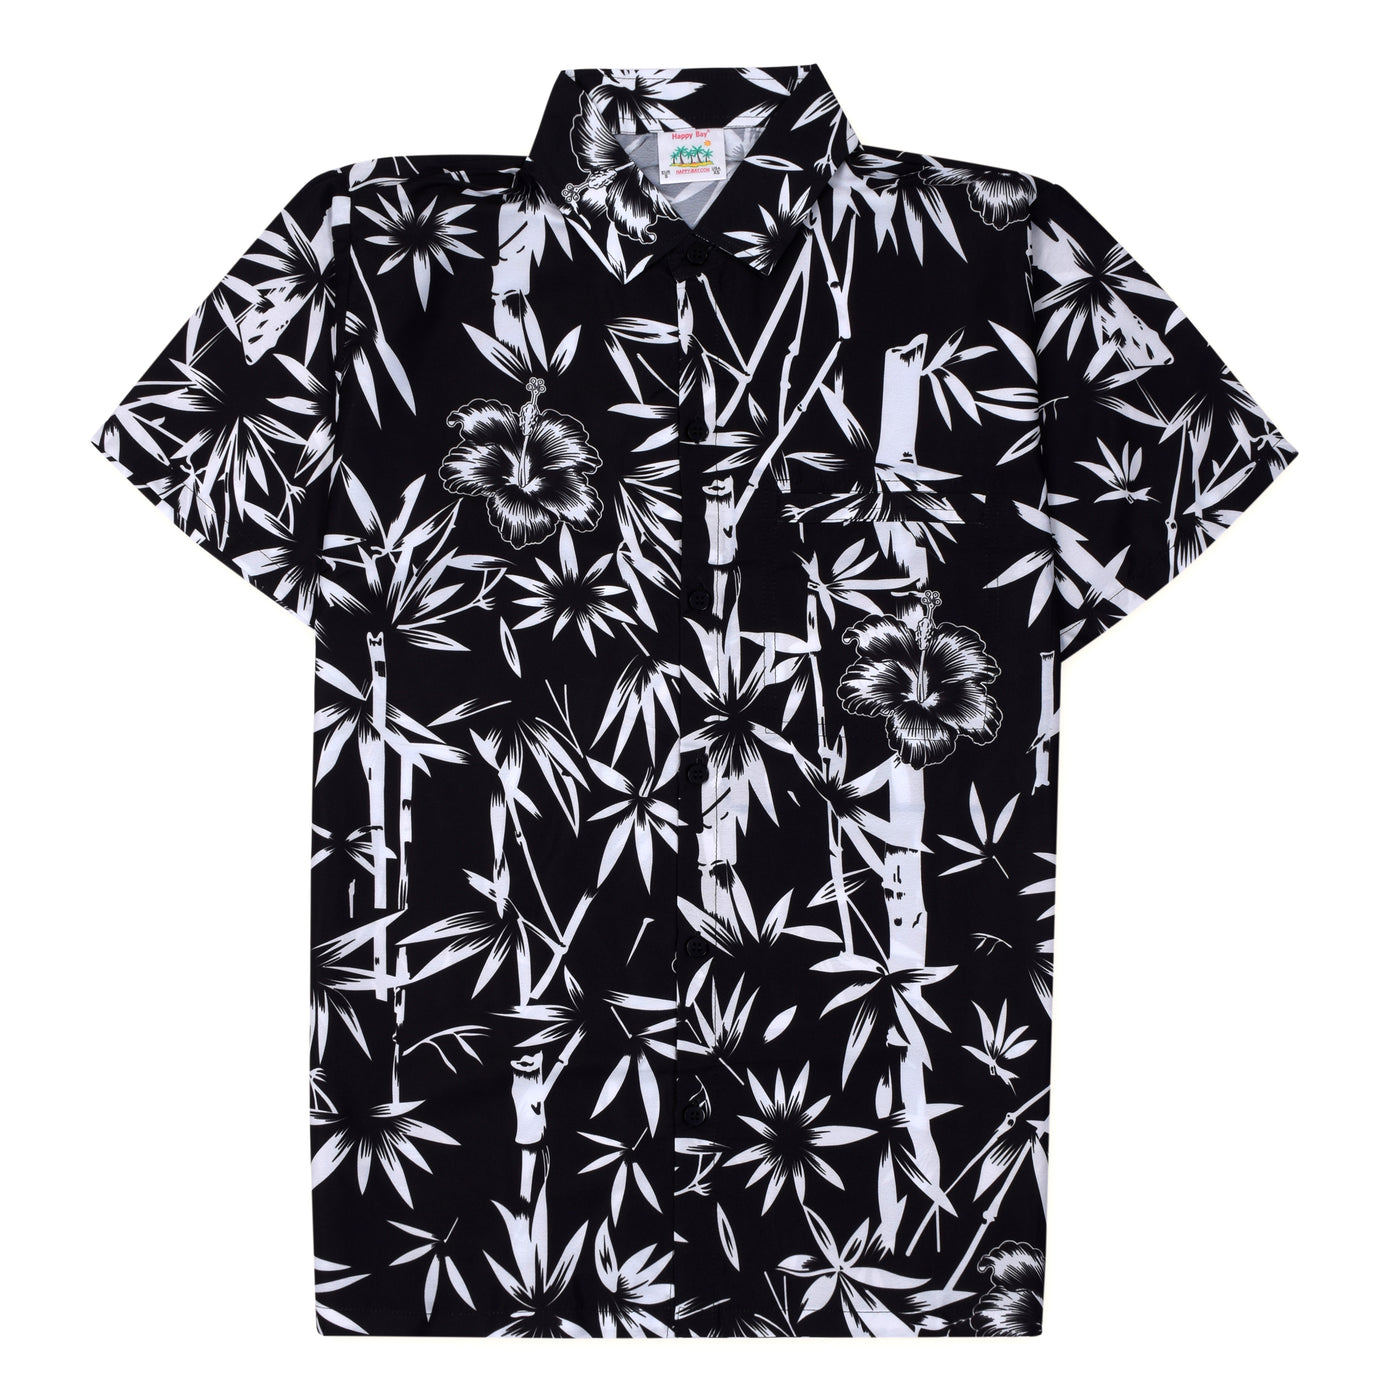 The tropical bamboo floral shirt